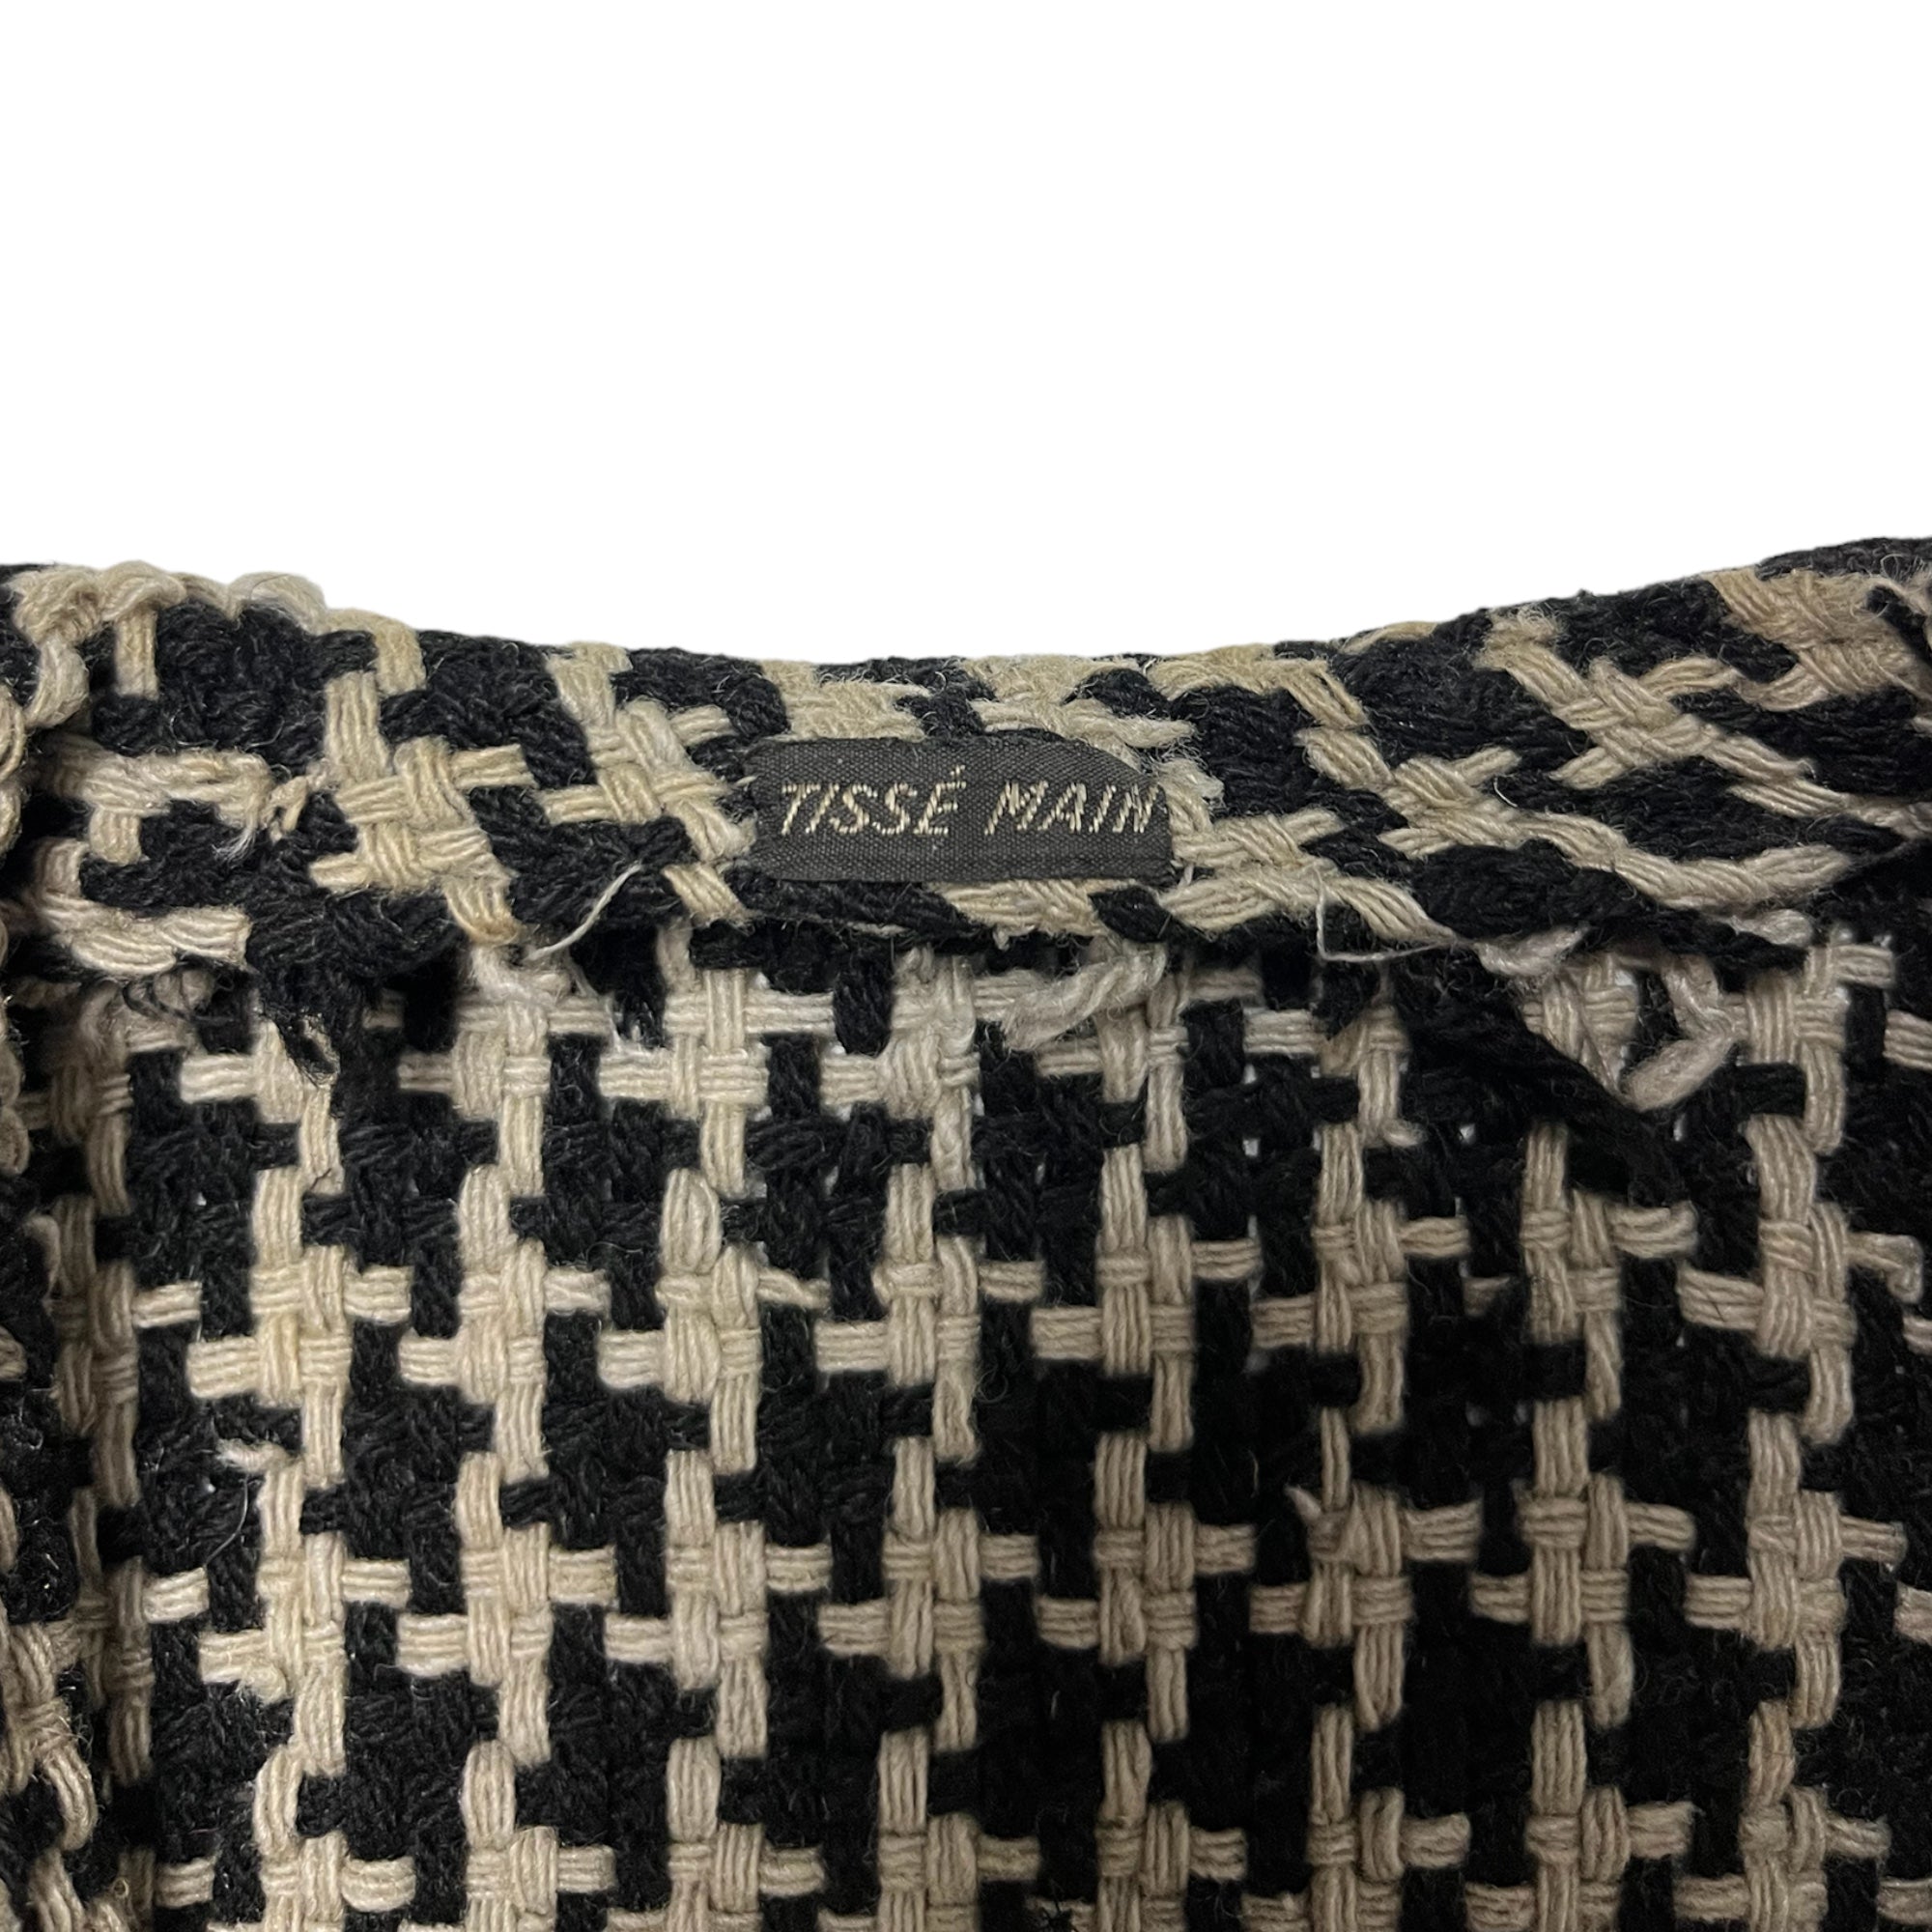 1930s French Women’s Knit with Heavy Distressing and Repairs - Black/Grey/Cream - S